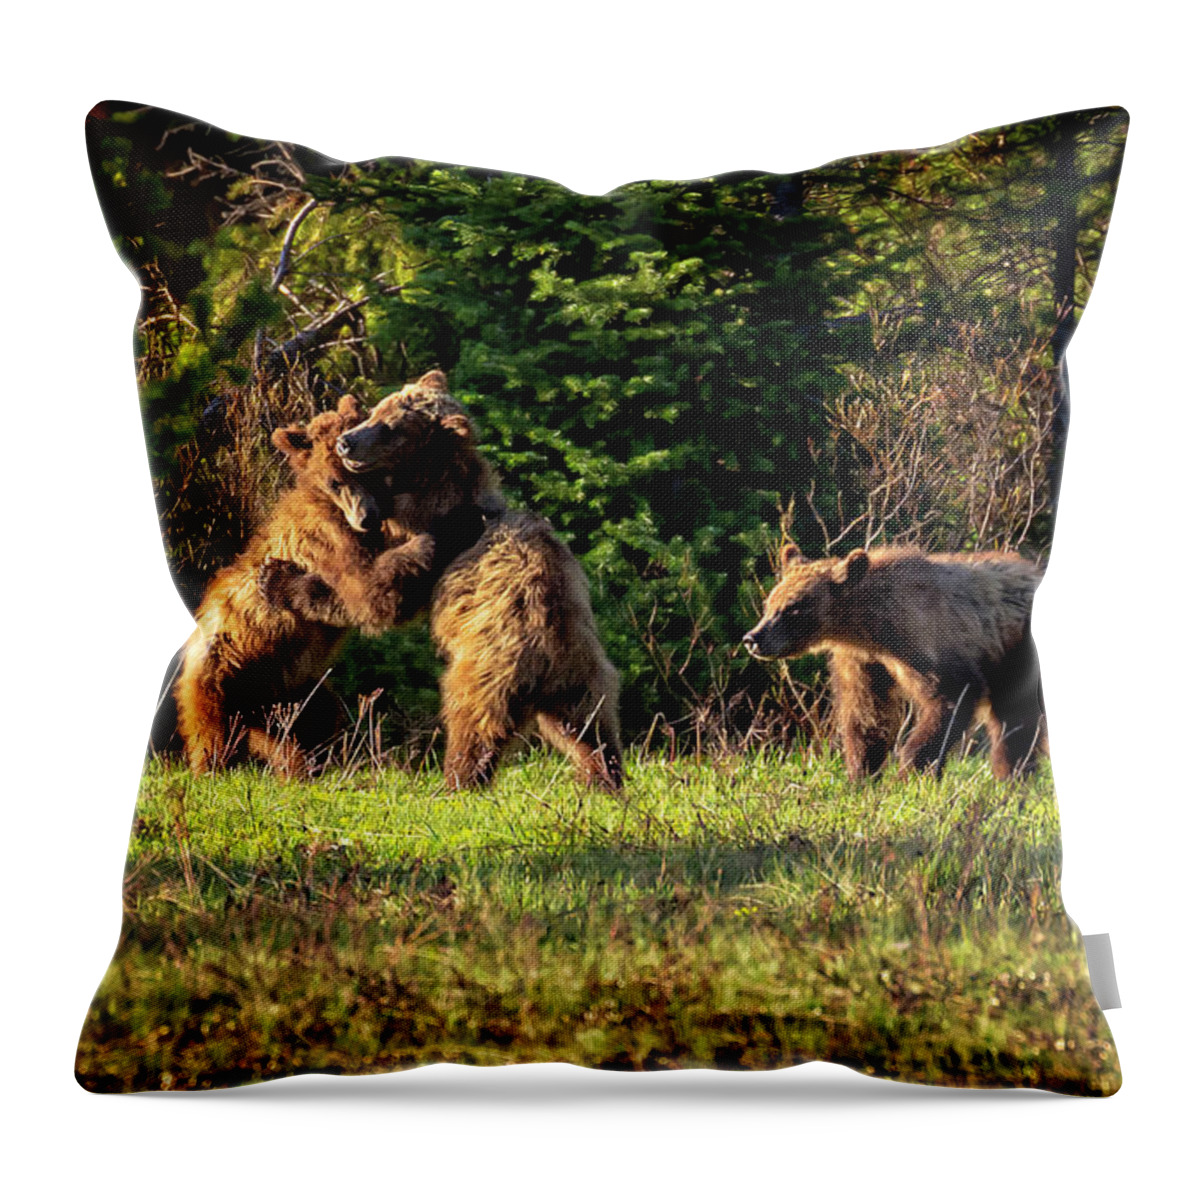 Gary Johnson Throw Pillow featuring the photograph Wrestling Bears by Gary Johnson